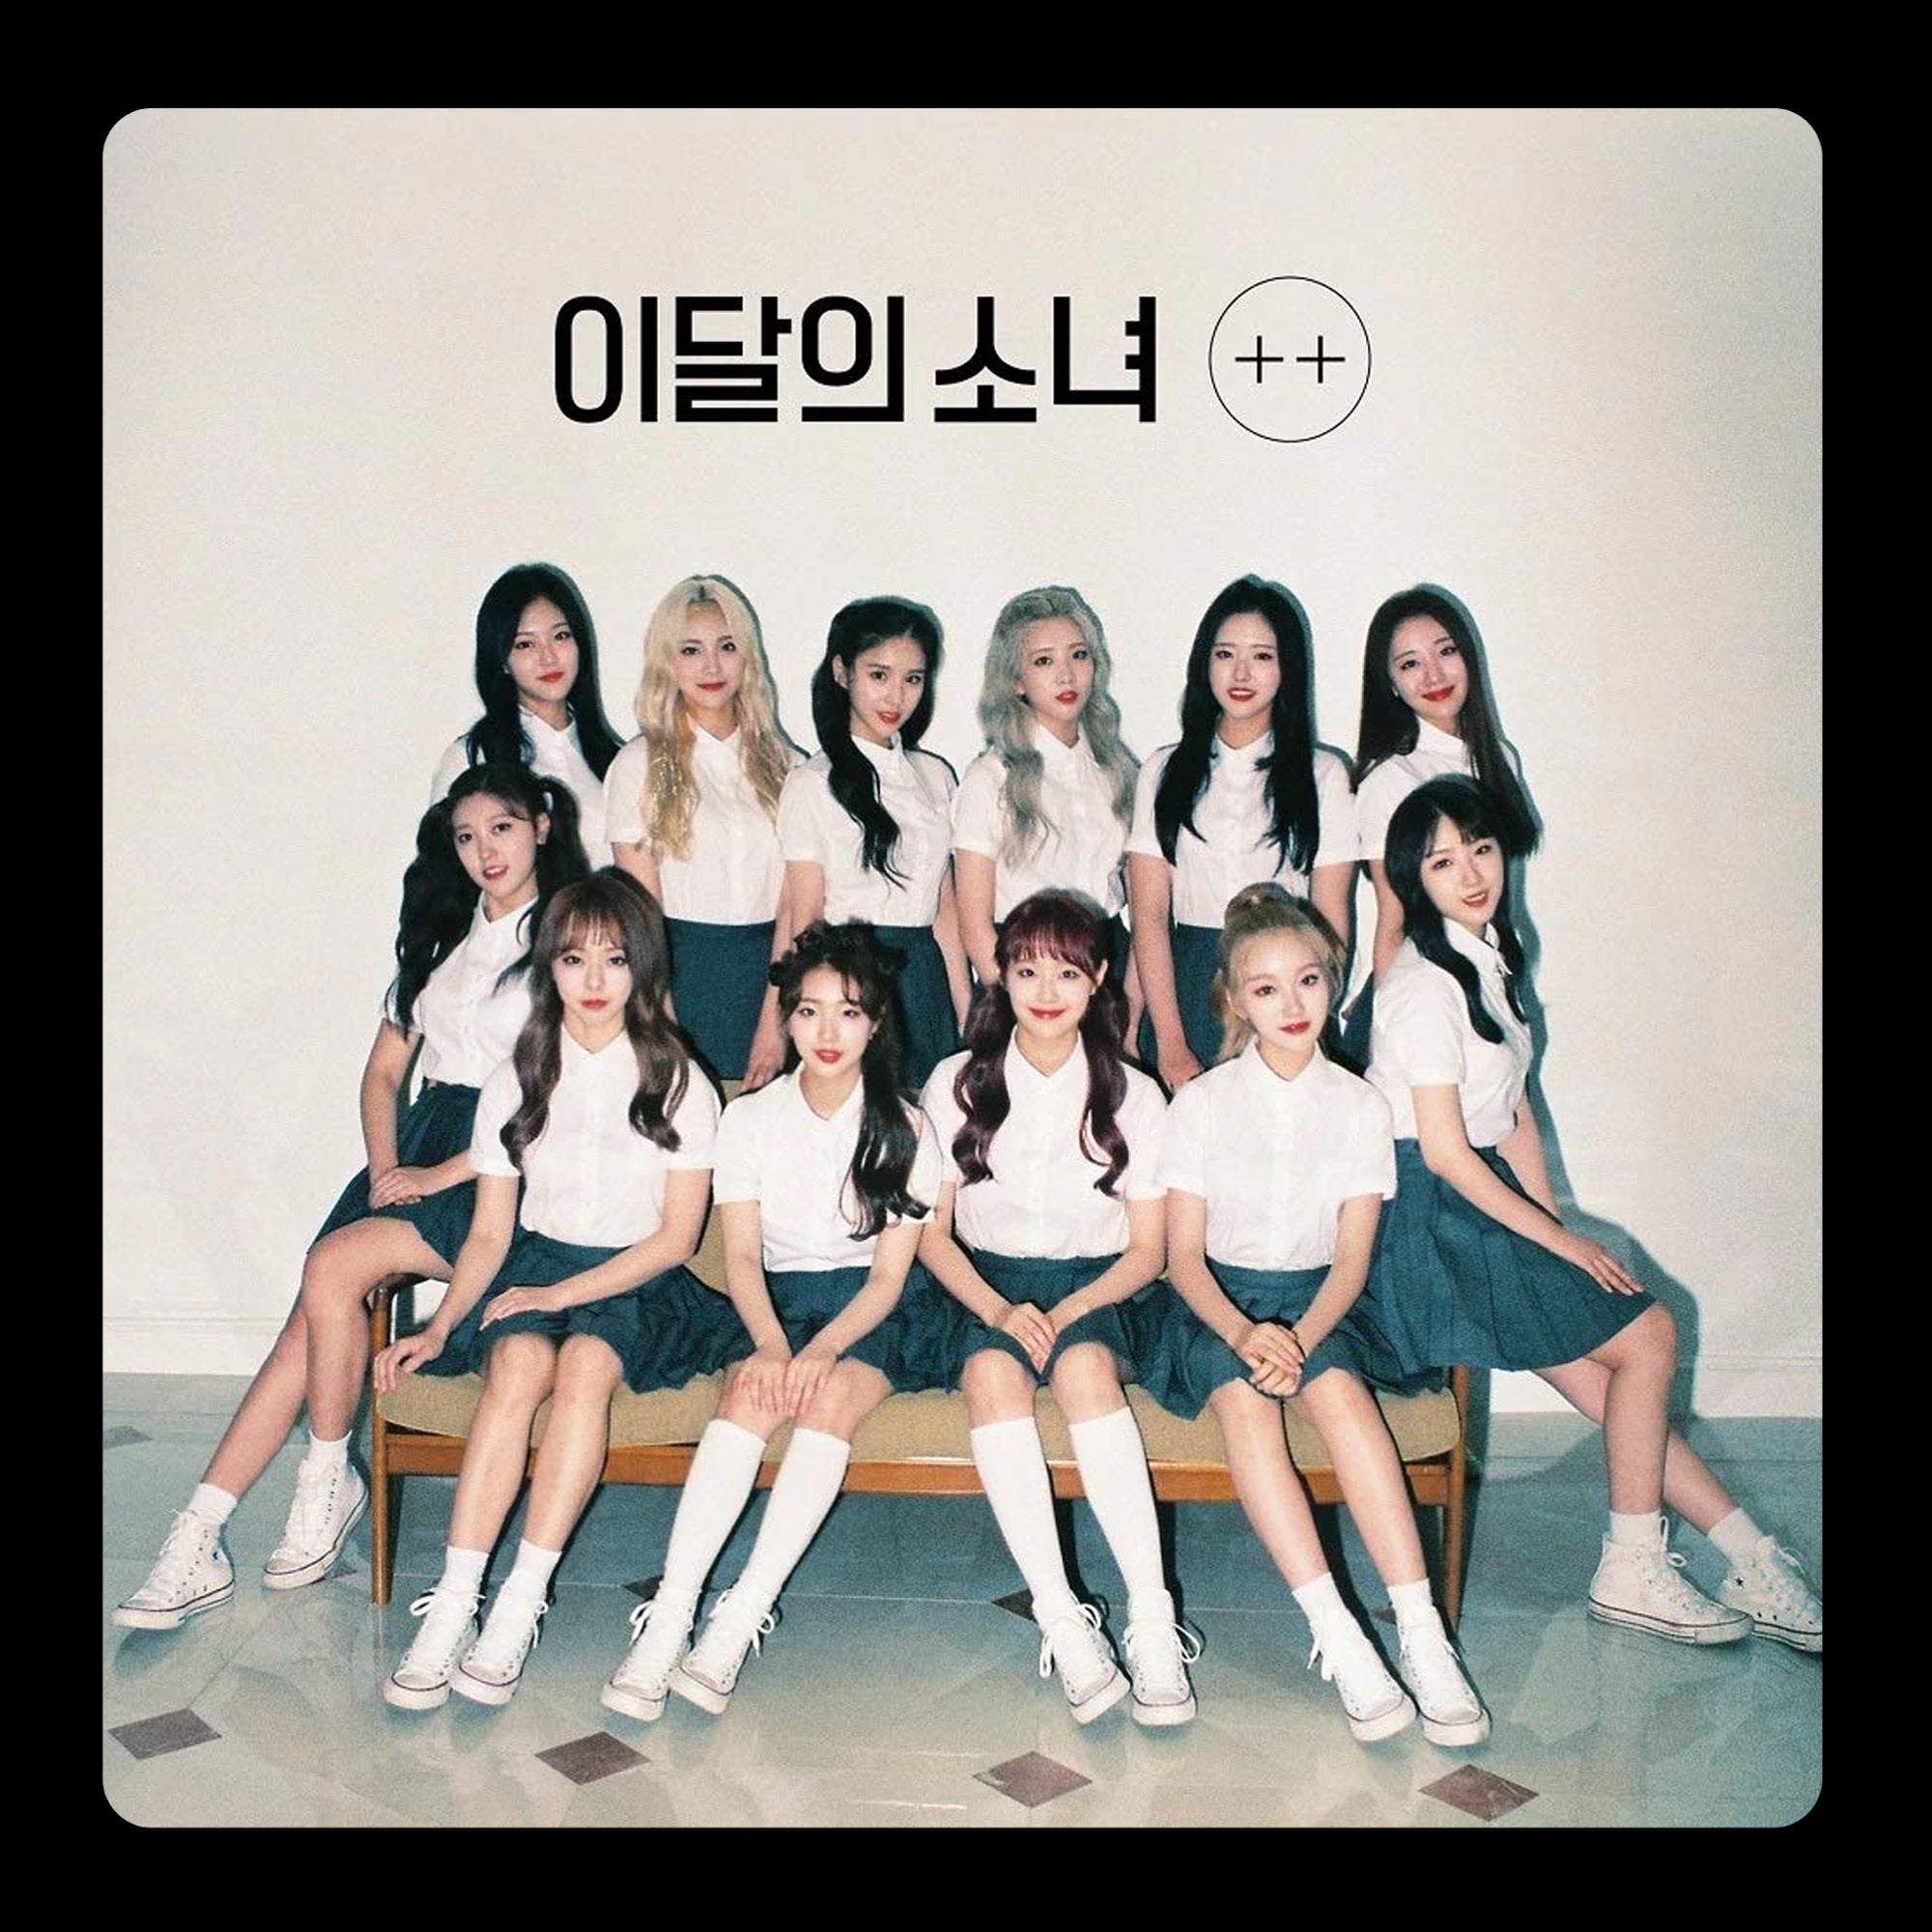 LOONA (This Month’s Girl) - ++ Ver. A limited